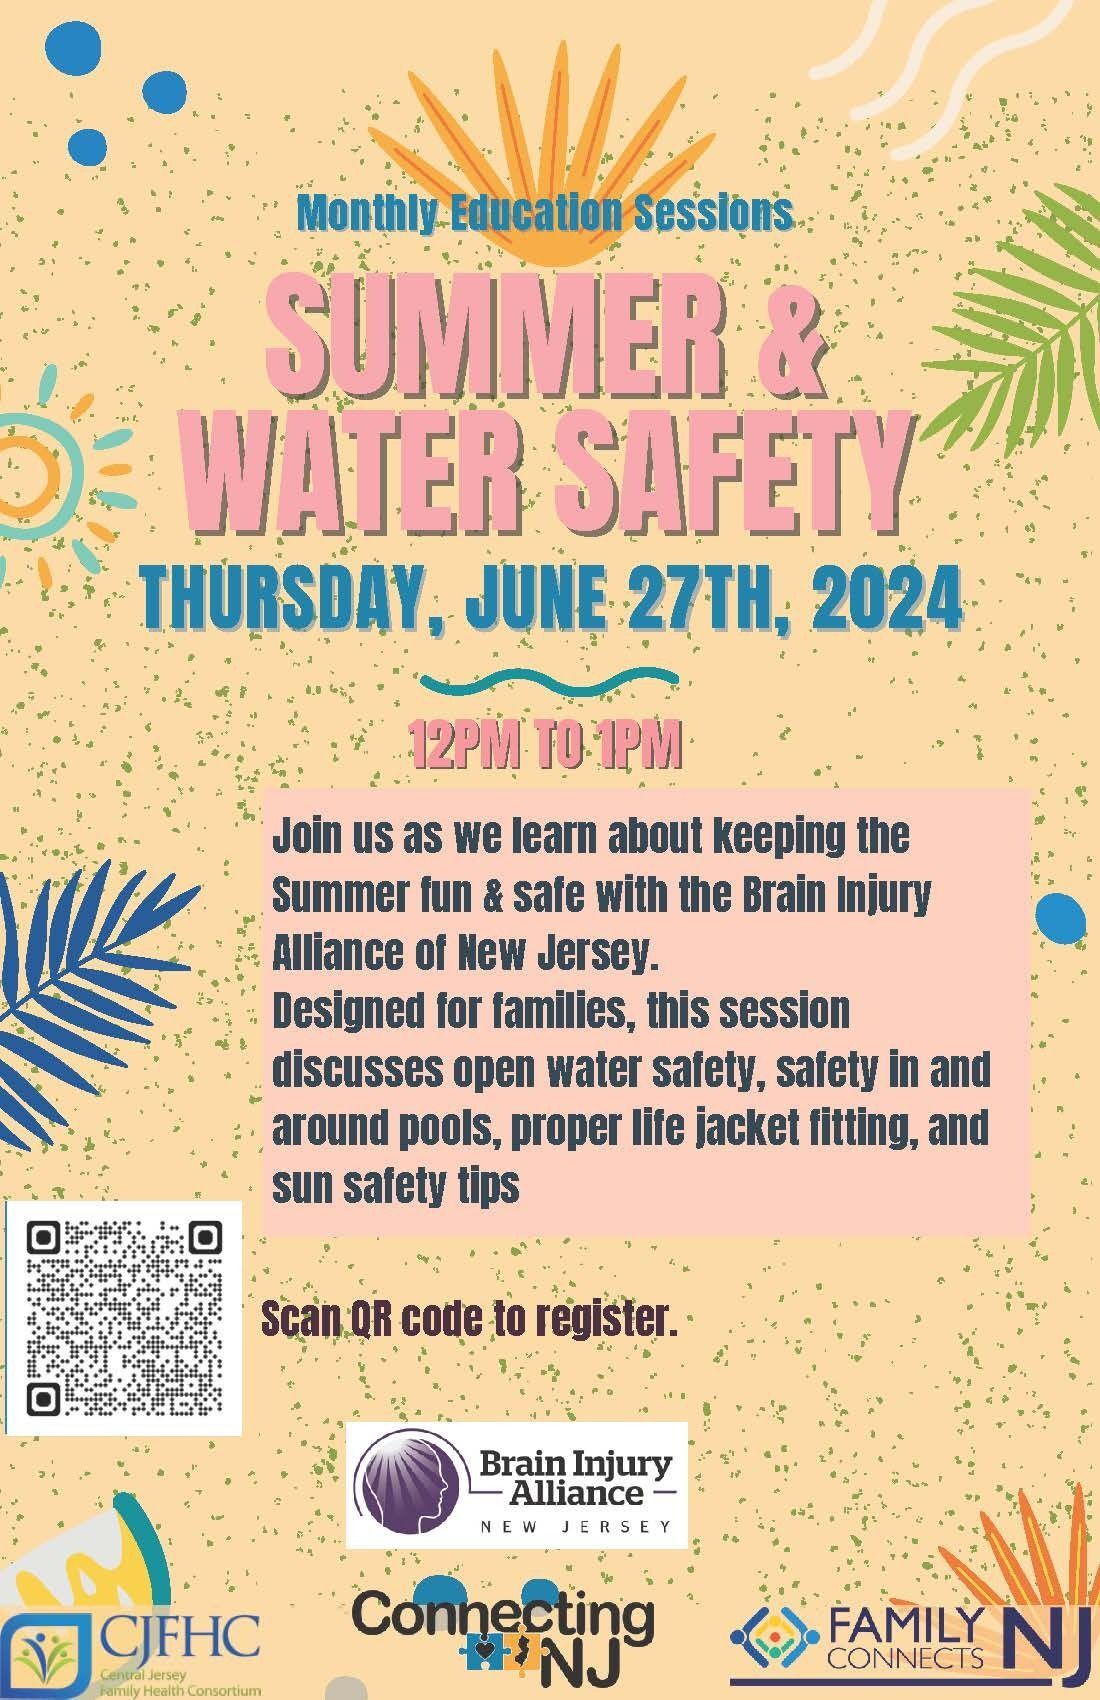 Connecting NJ Education Series: Summer Safety: Protecting Your Family with the Brain Injury Alliance of NJ